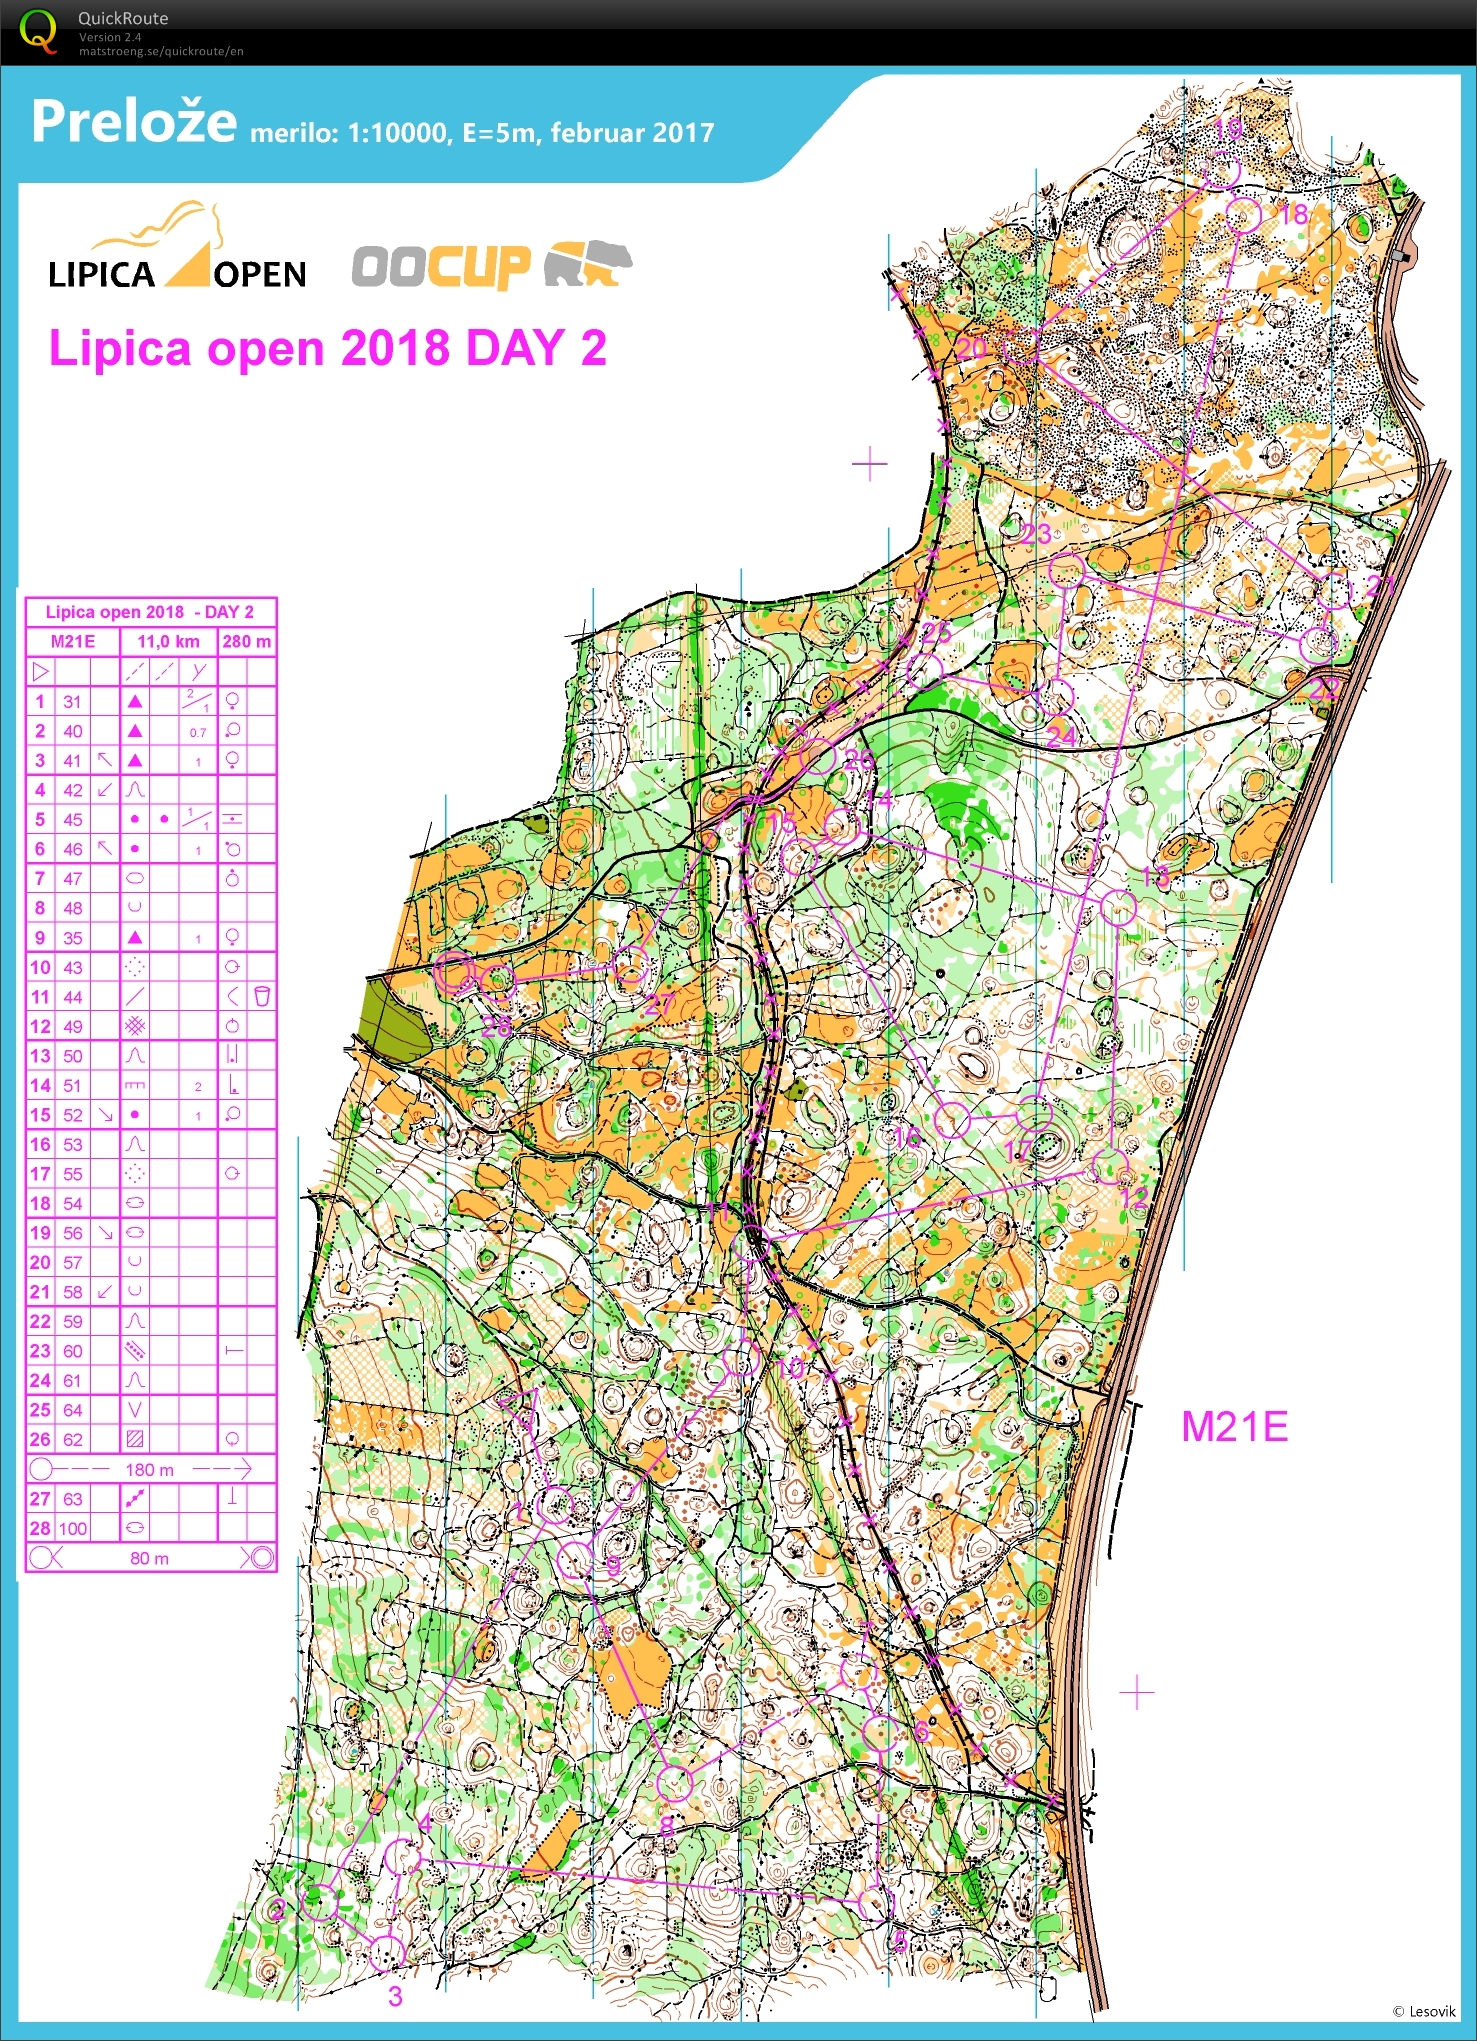 Lipica open 2018. - day2 (2018-03-11)